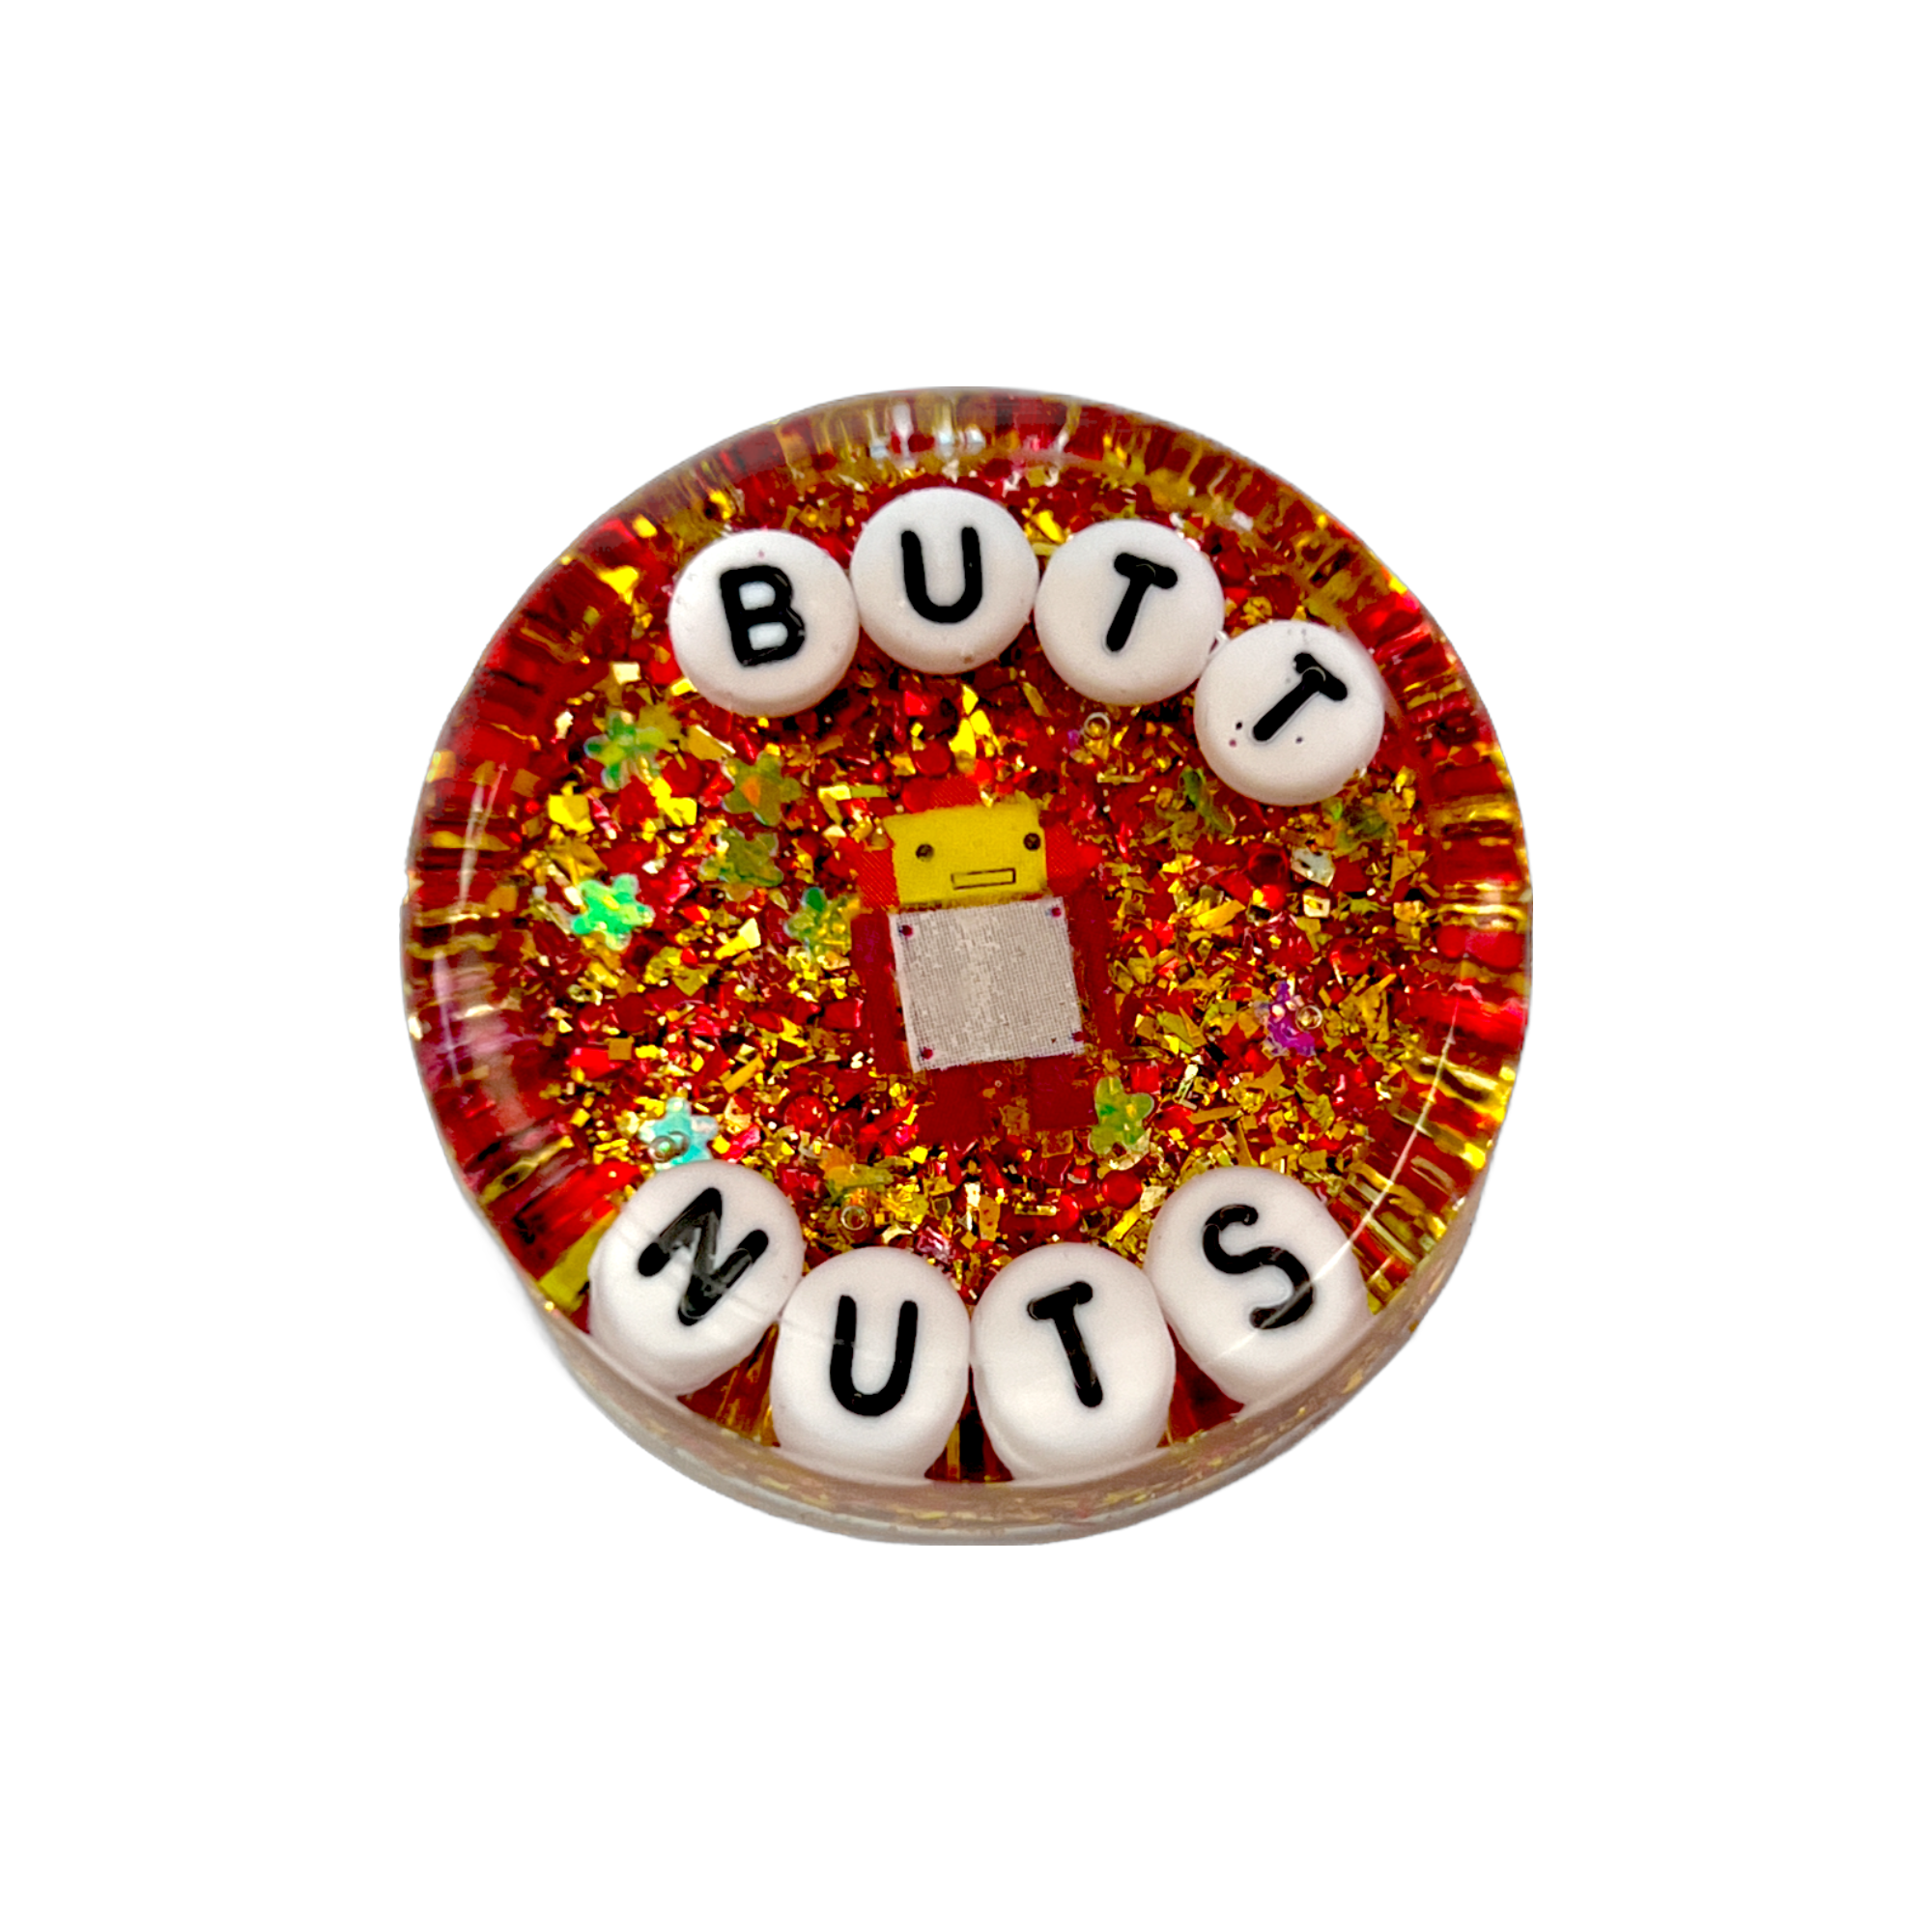 Butt Nuts - Shower Art - READY TO SHIP